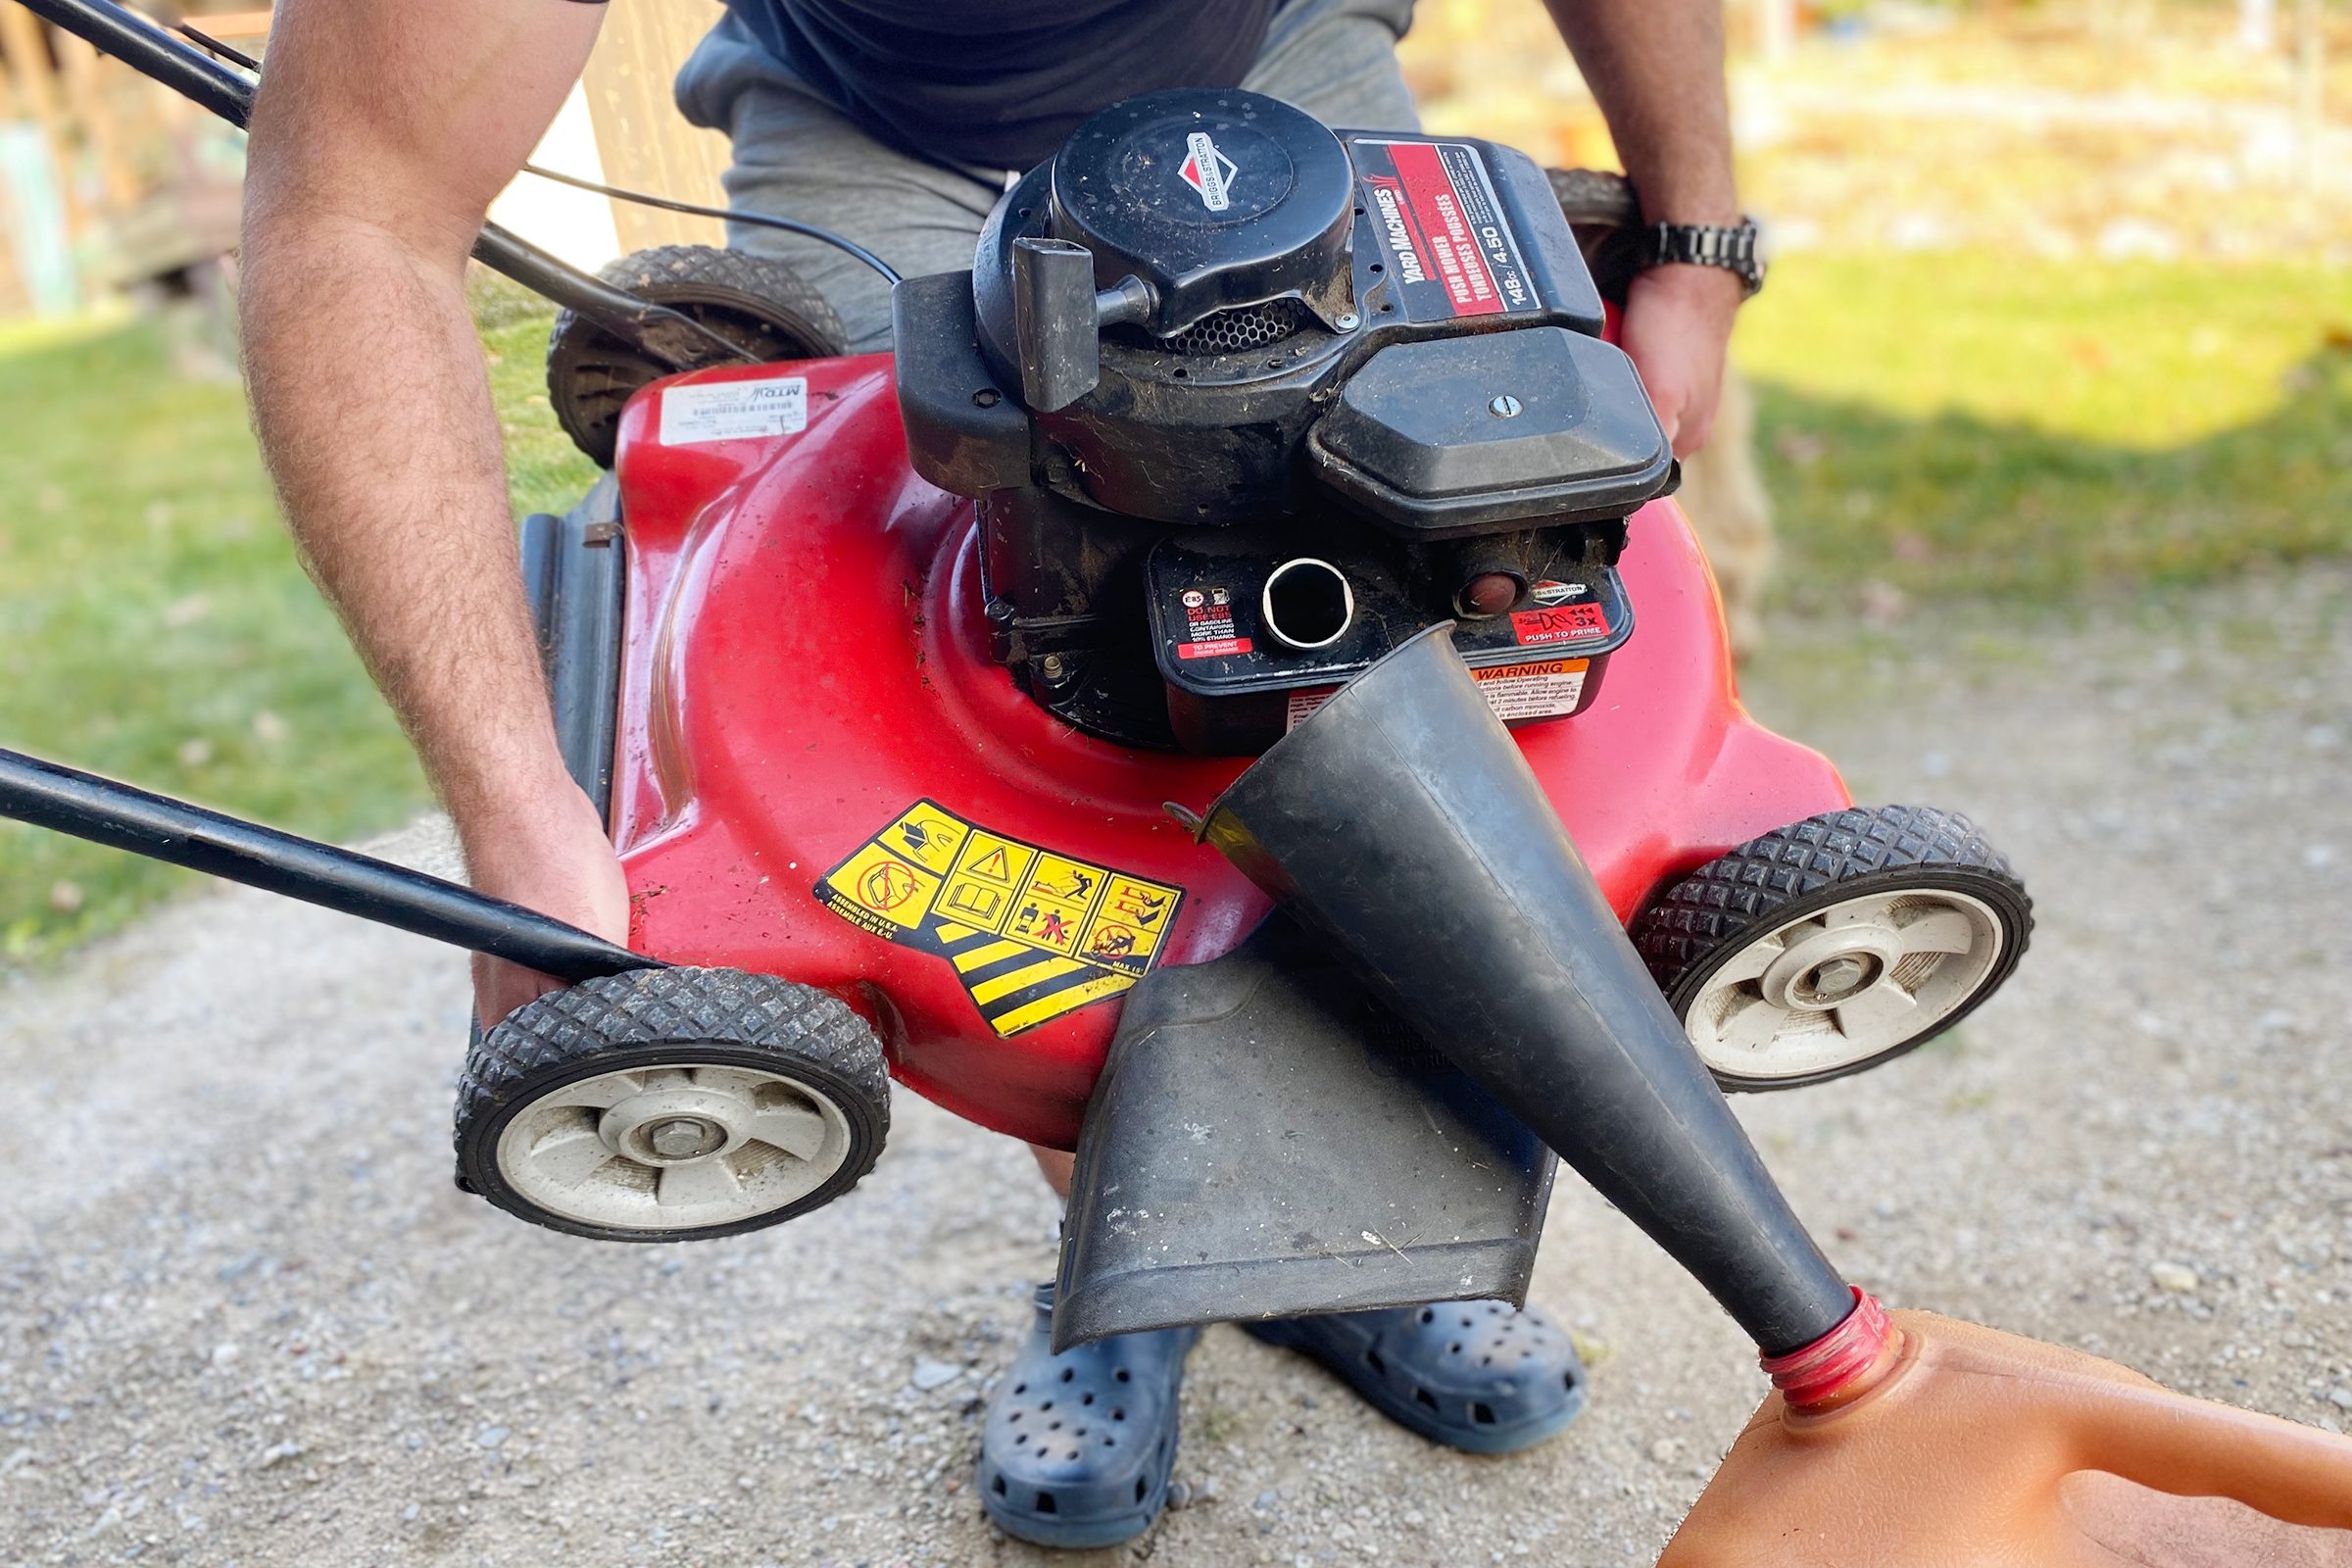 Drain gas from mower (non-siphon method)